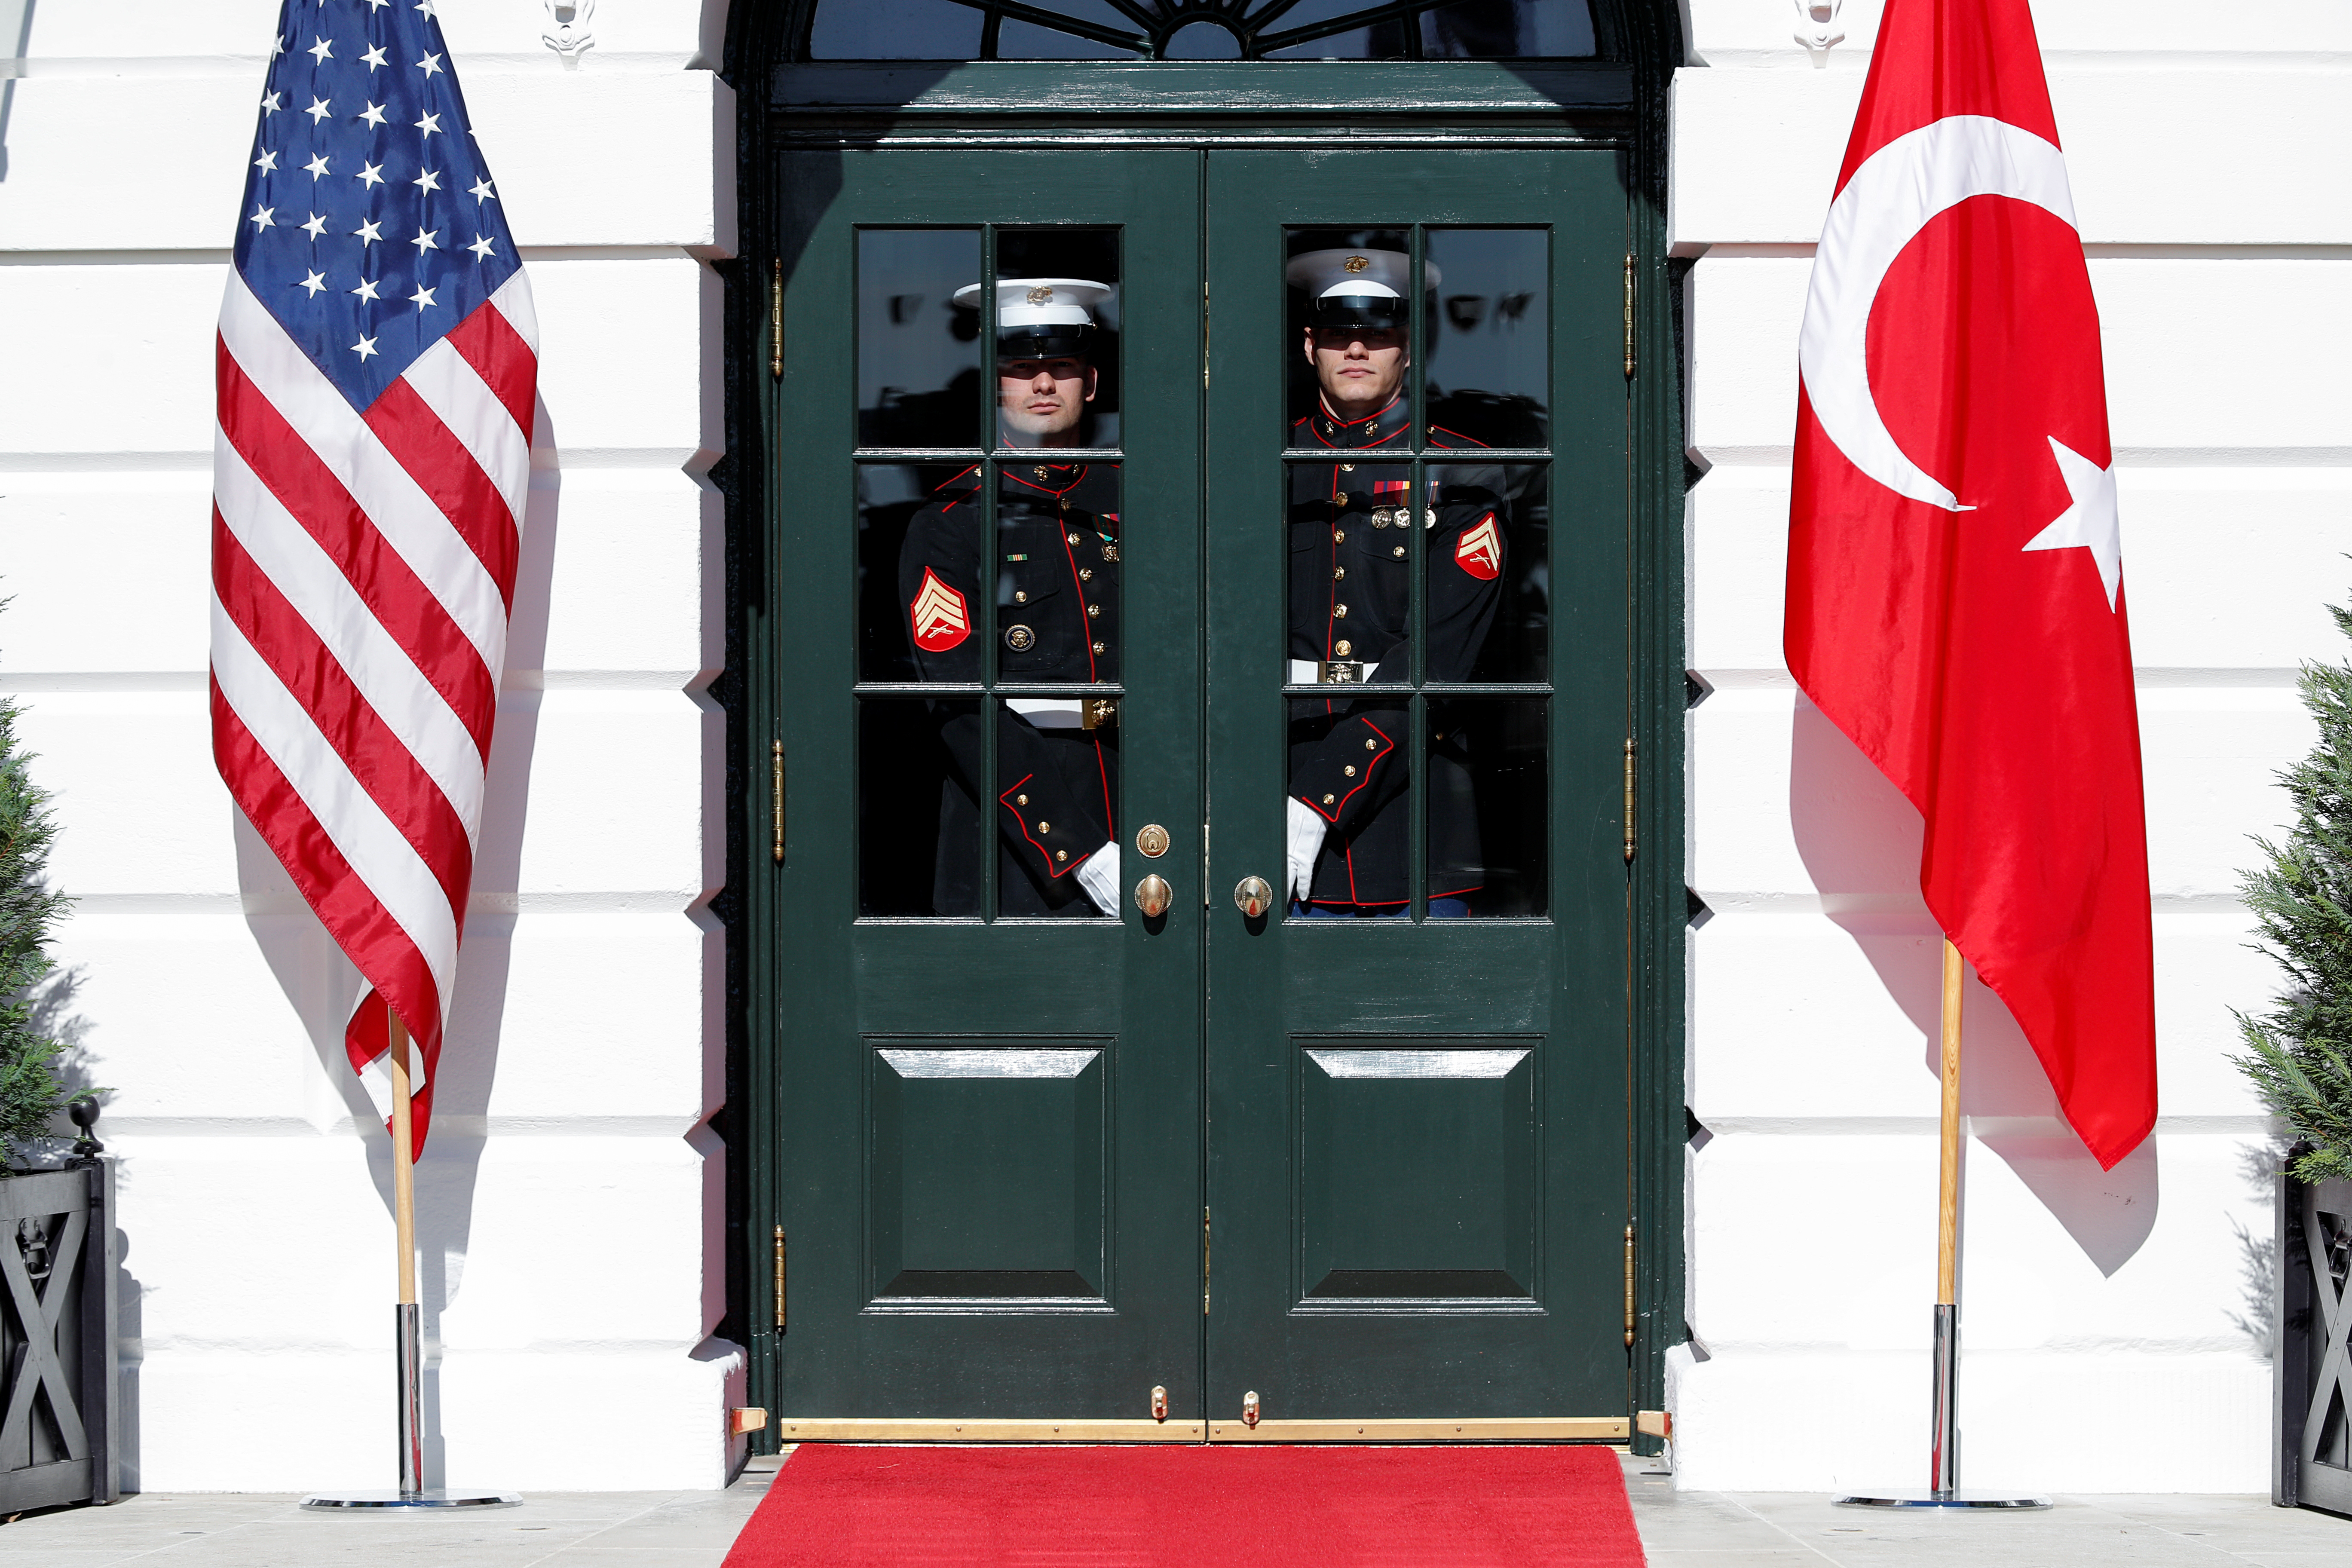 U.S. Marines stand at the South Portico entrance prior to U.S. President Donald Trump welcoming Turkey’s President Tayyip Erdogan at the White House in Washington, U.S., November 13, 2013. REUTERS/Tom Brenner